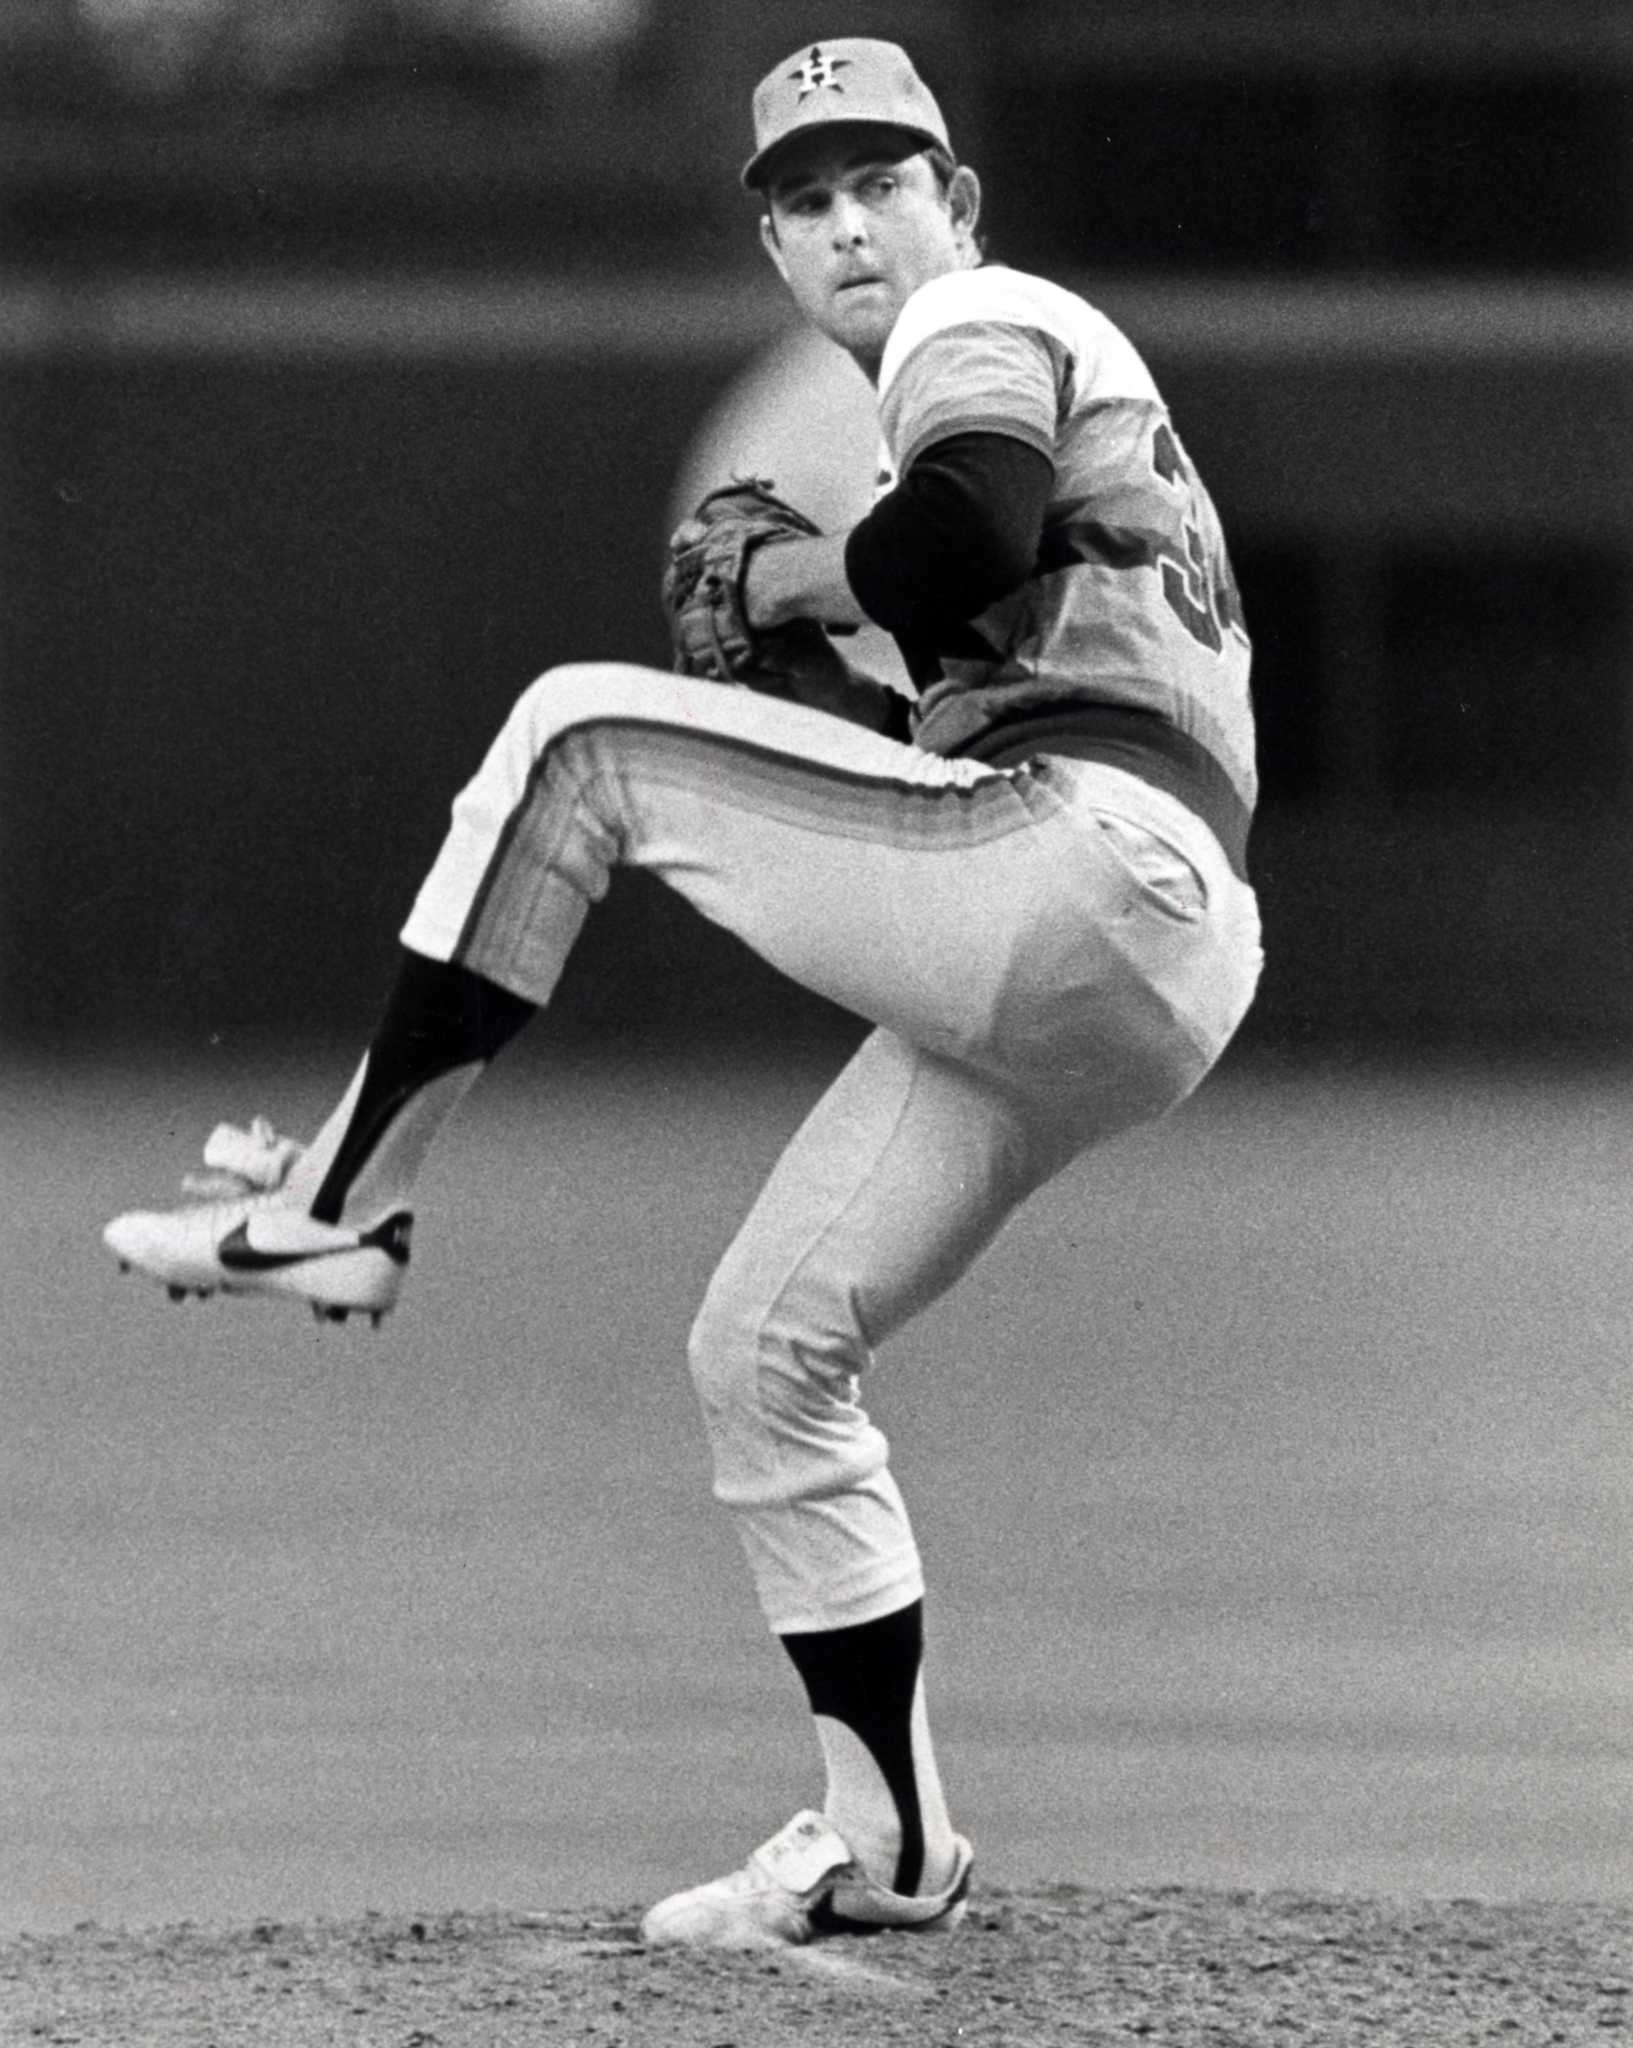 Texas Rangers Nolan Ryan in action during spring training, Port News  Photo - Getty Images